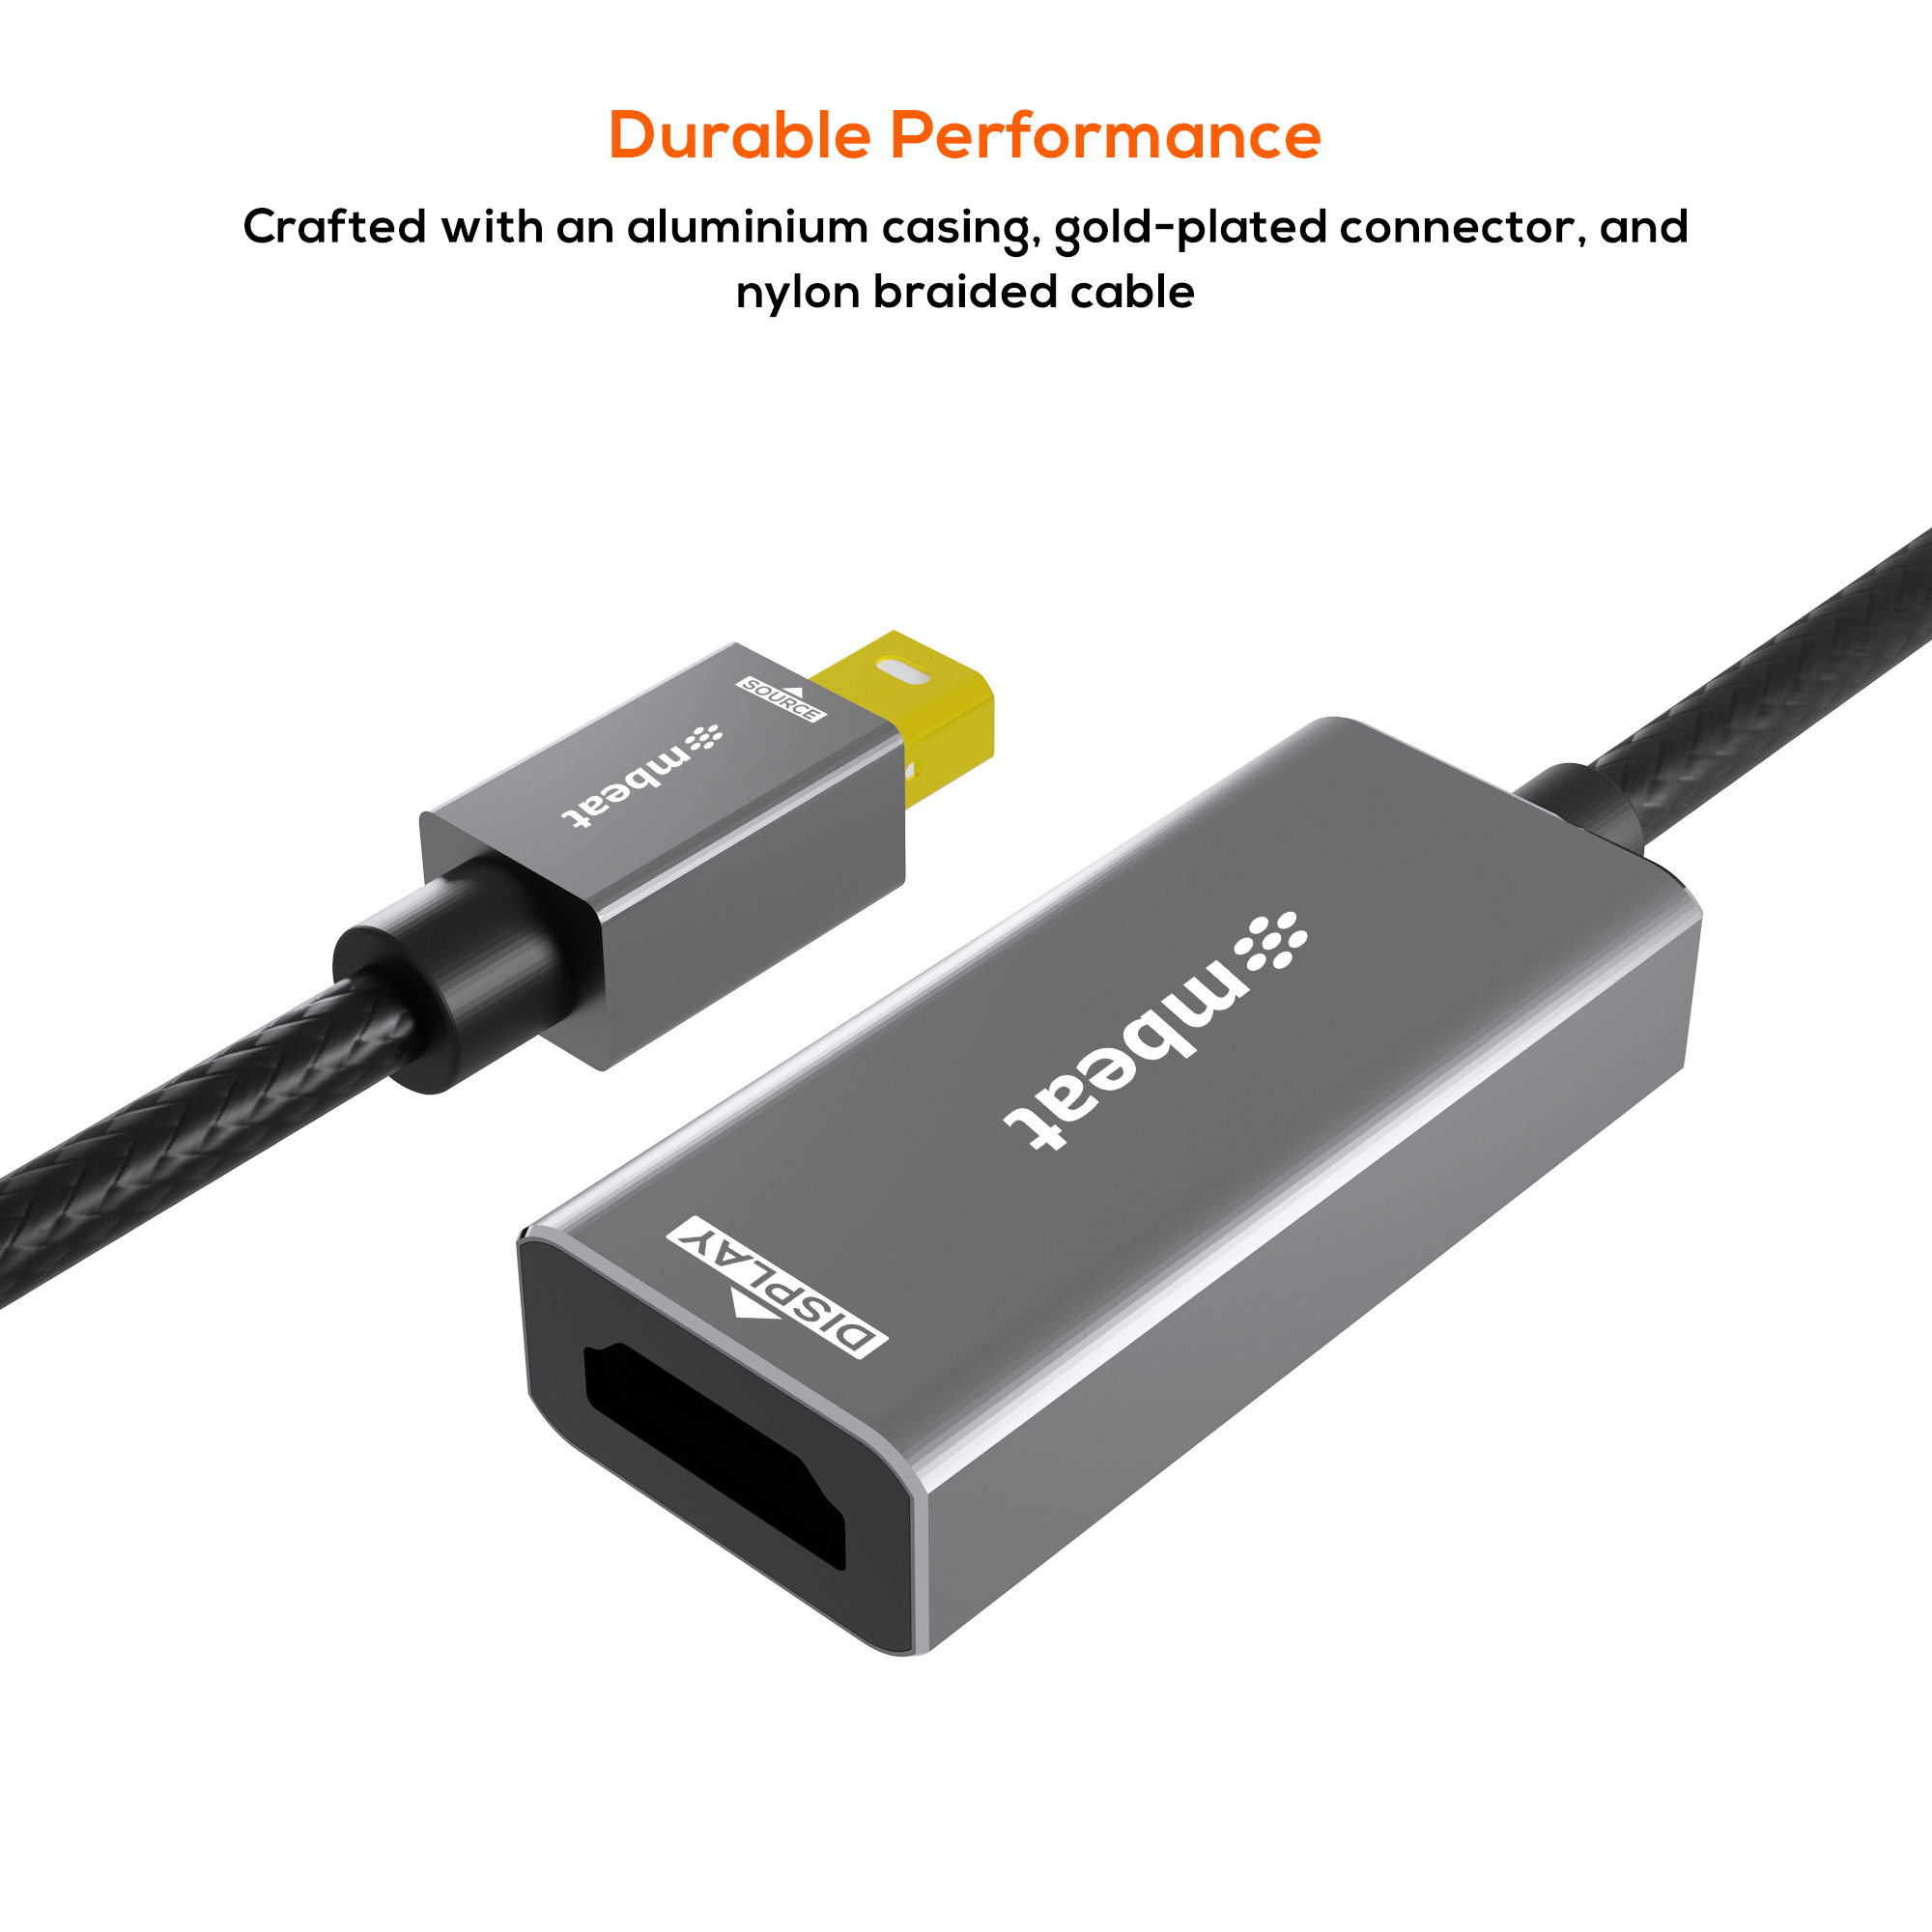 A large marketing image providing additional information about the product mbeat Tough Link Mini DisplayPort to HDMI Adapter - Additional alt info not provided